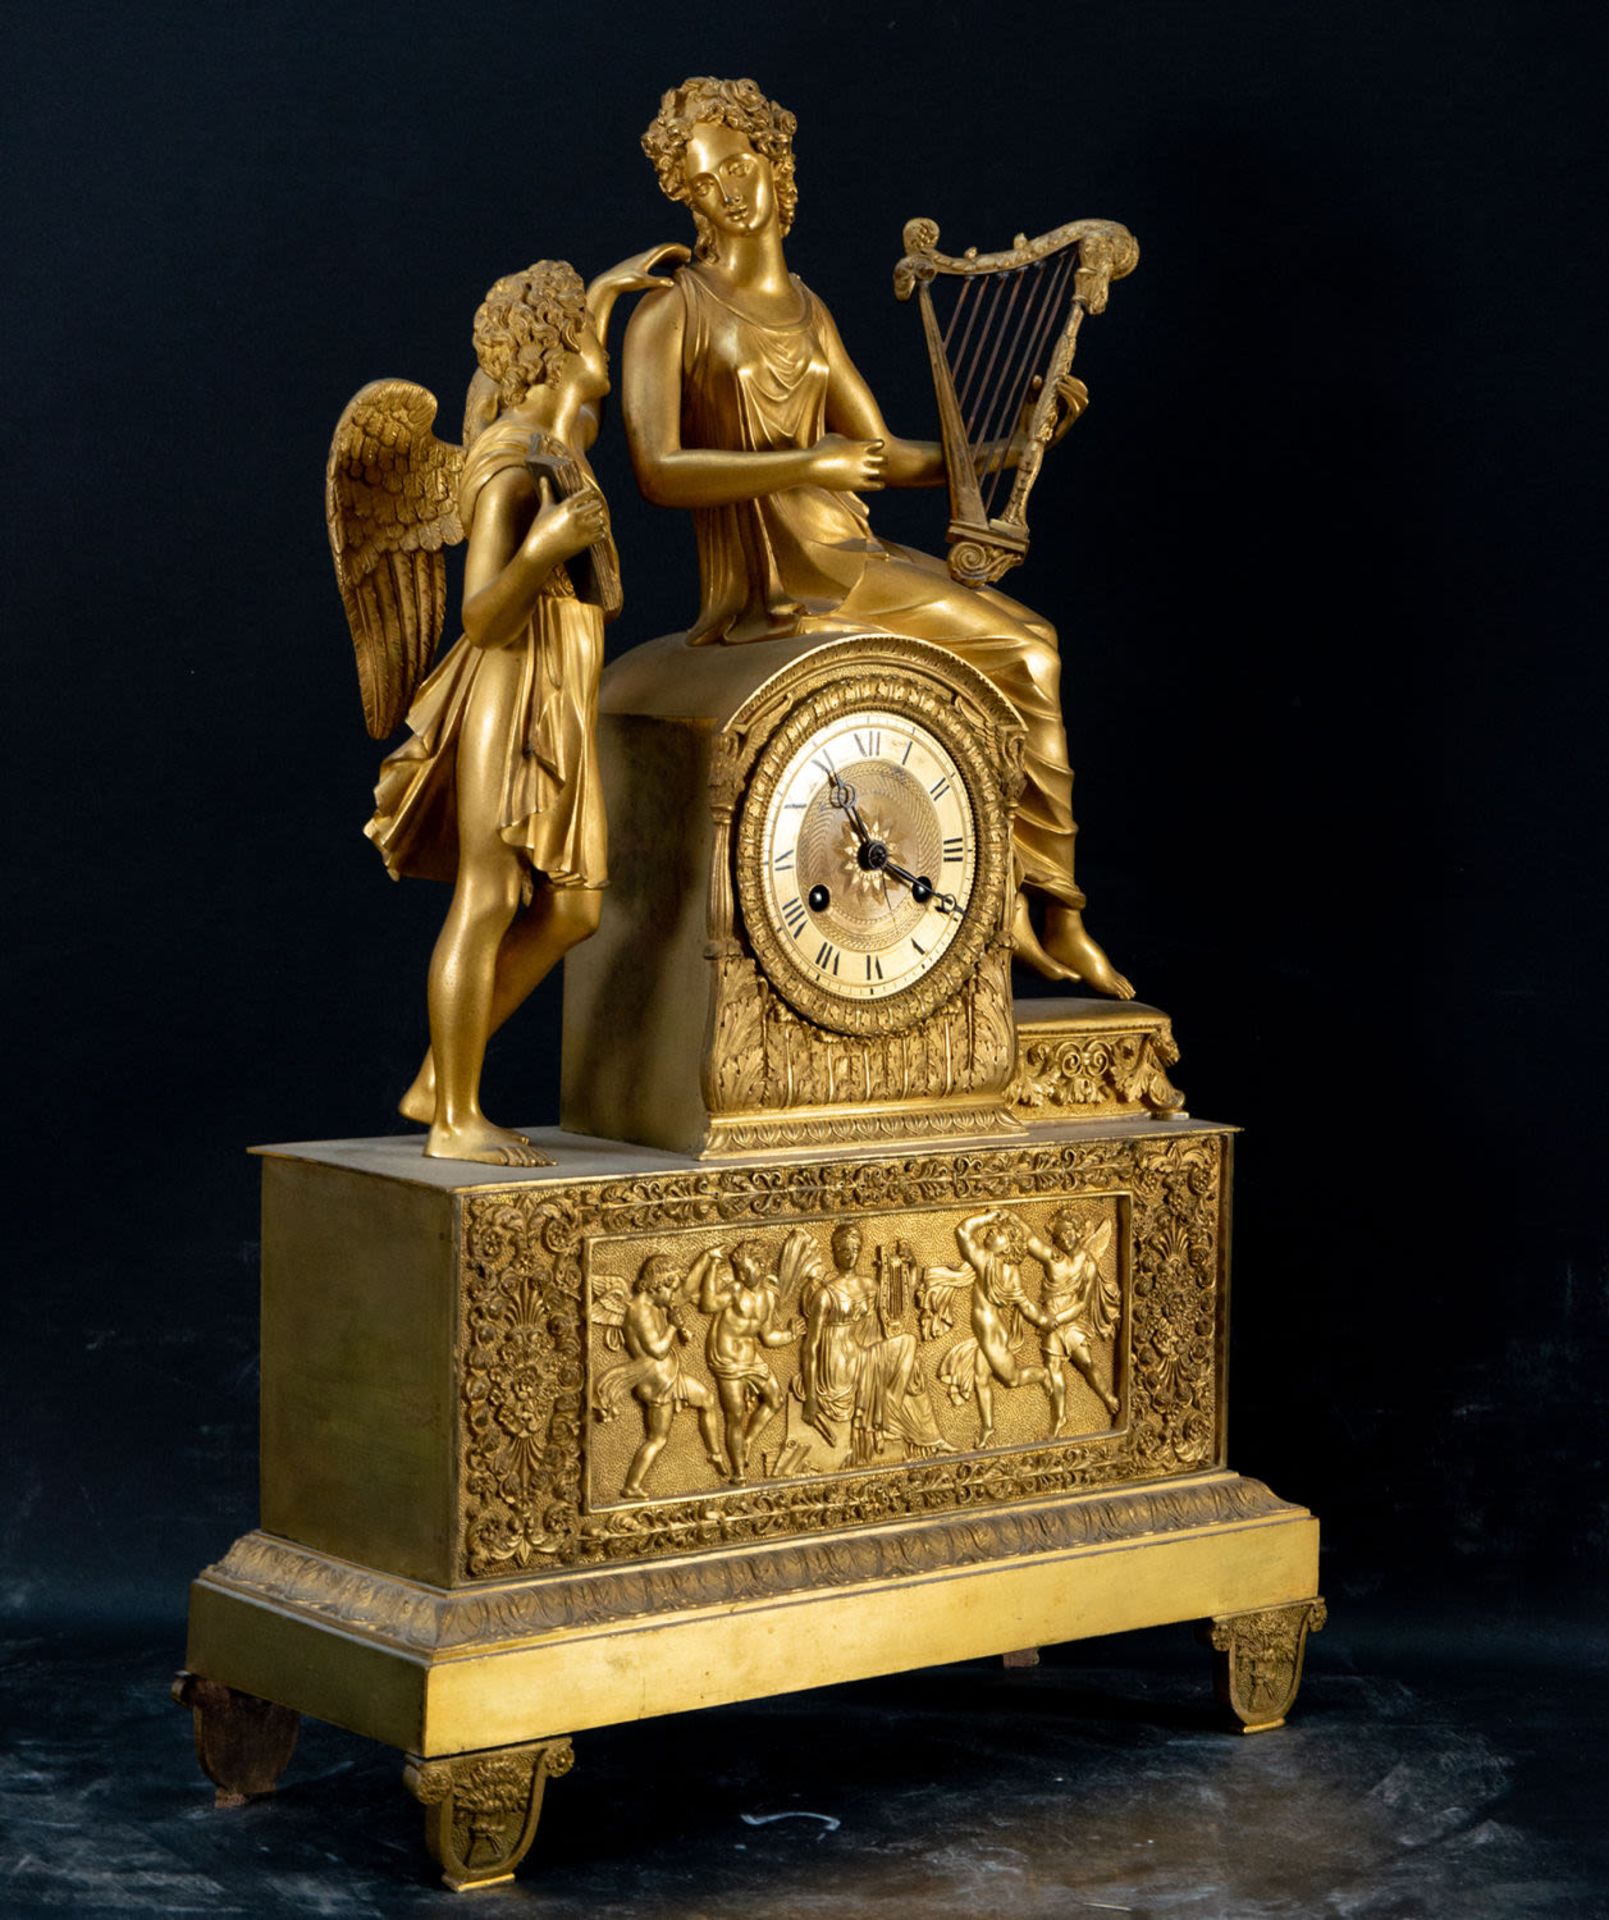 Large French Empire Clock in gilt bronze depicting Euterpe with Cupid, 19th century - Image 3 of 4